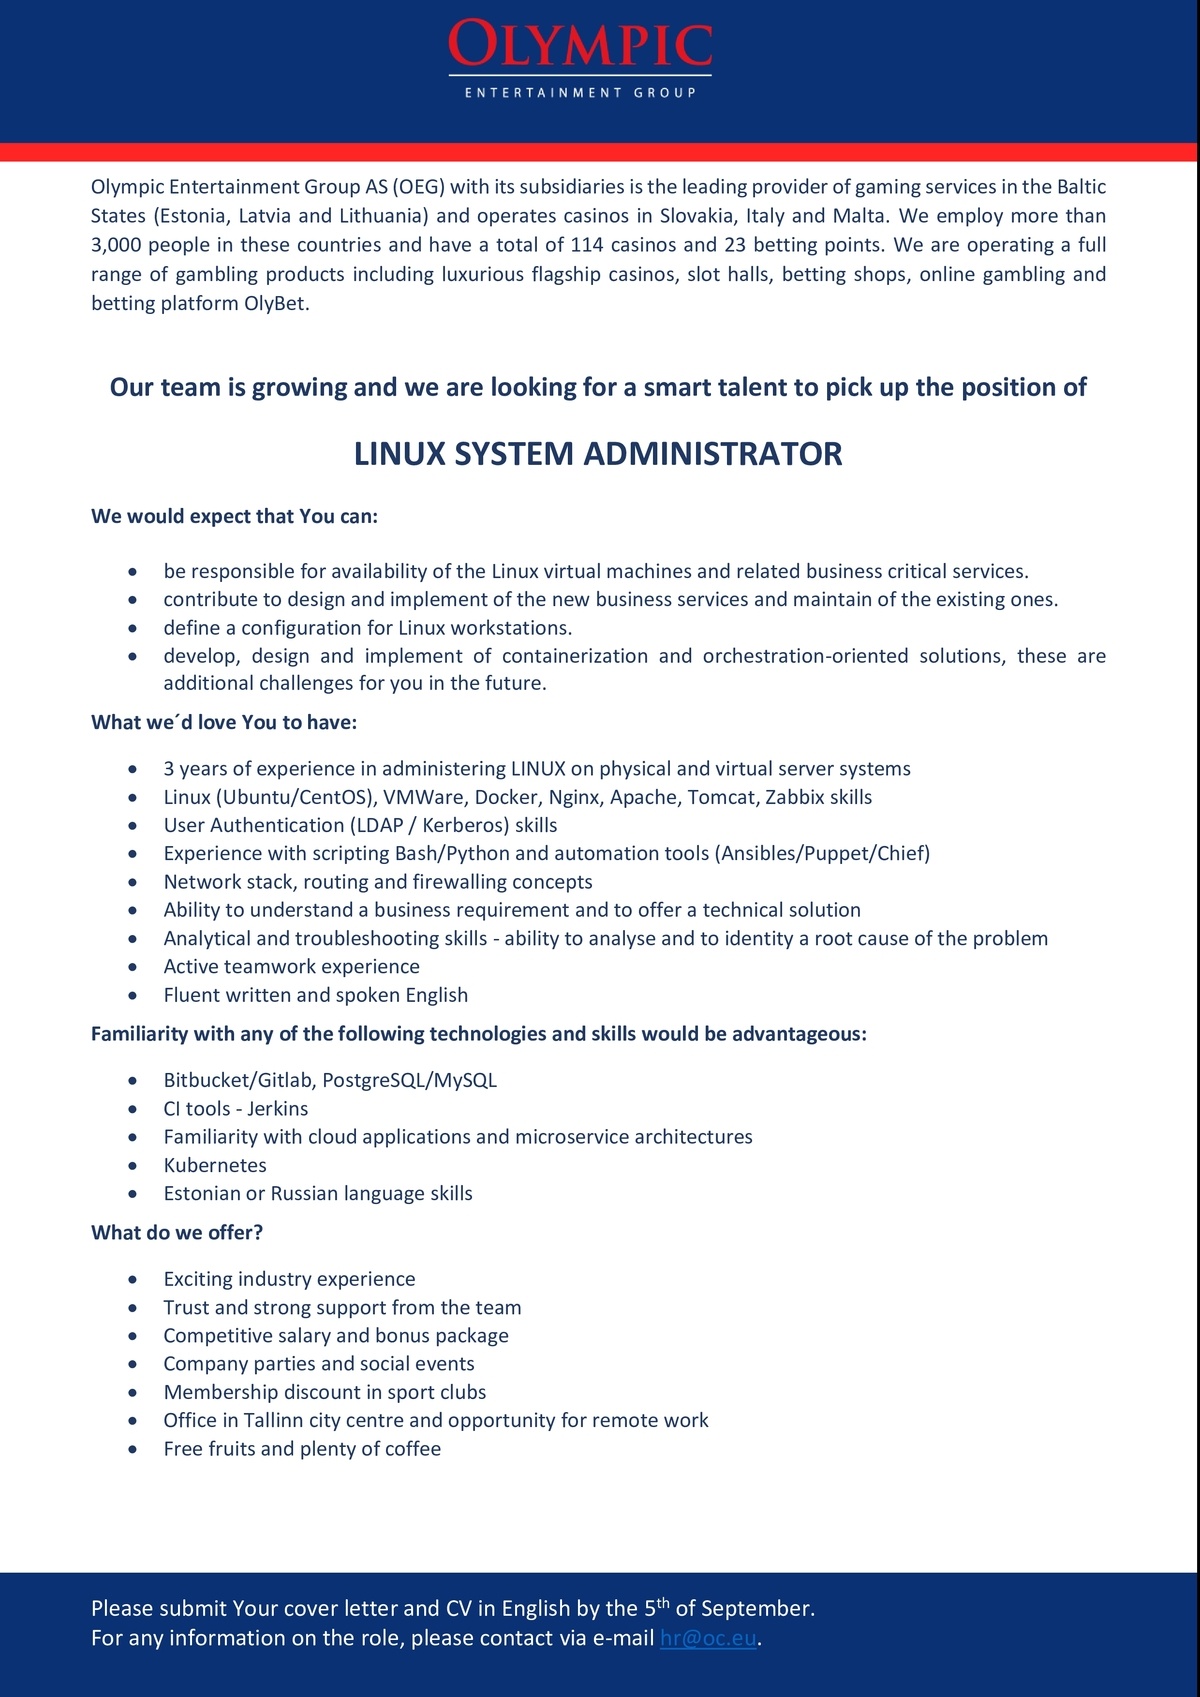 OLYMPIC ENTERTAINMENT GROUP AS LINUX SYSTEM ADMINISTRATOR